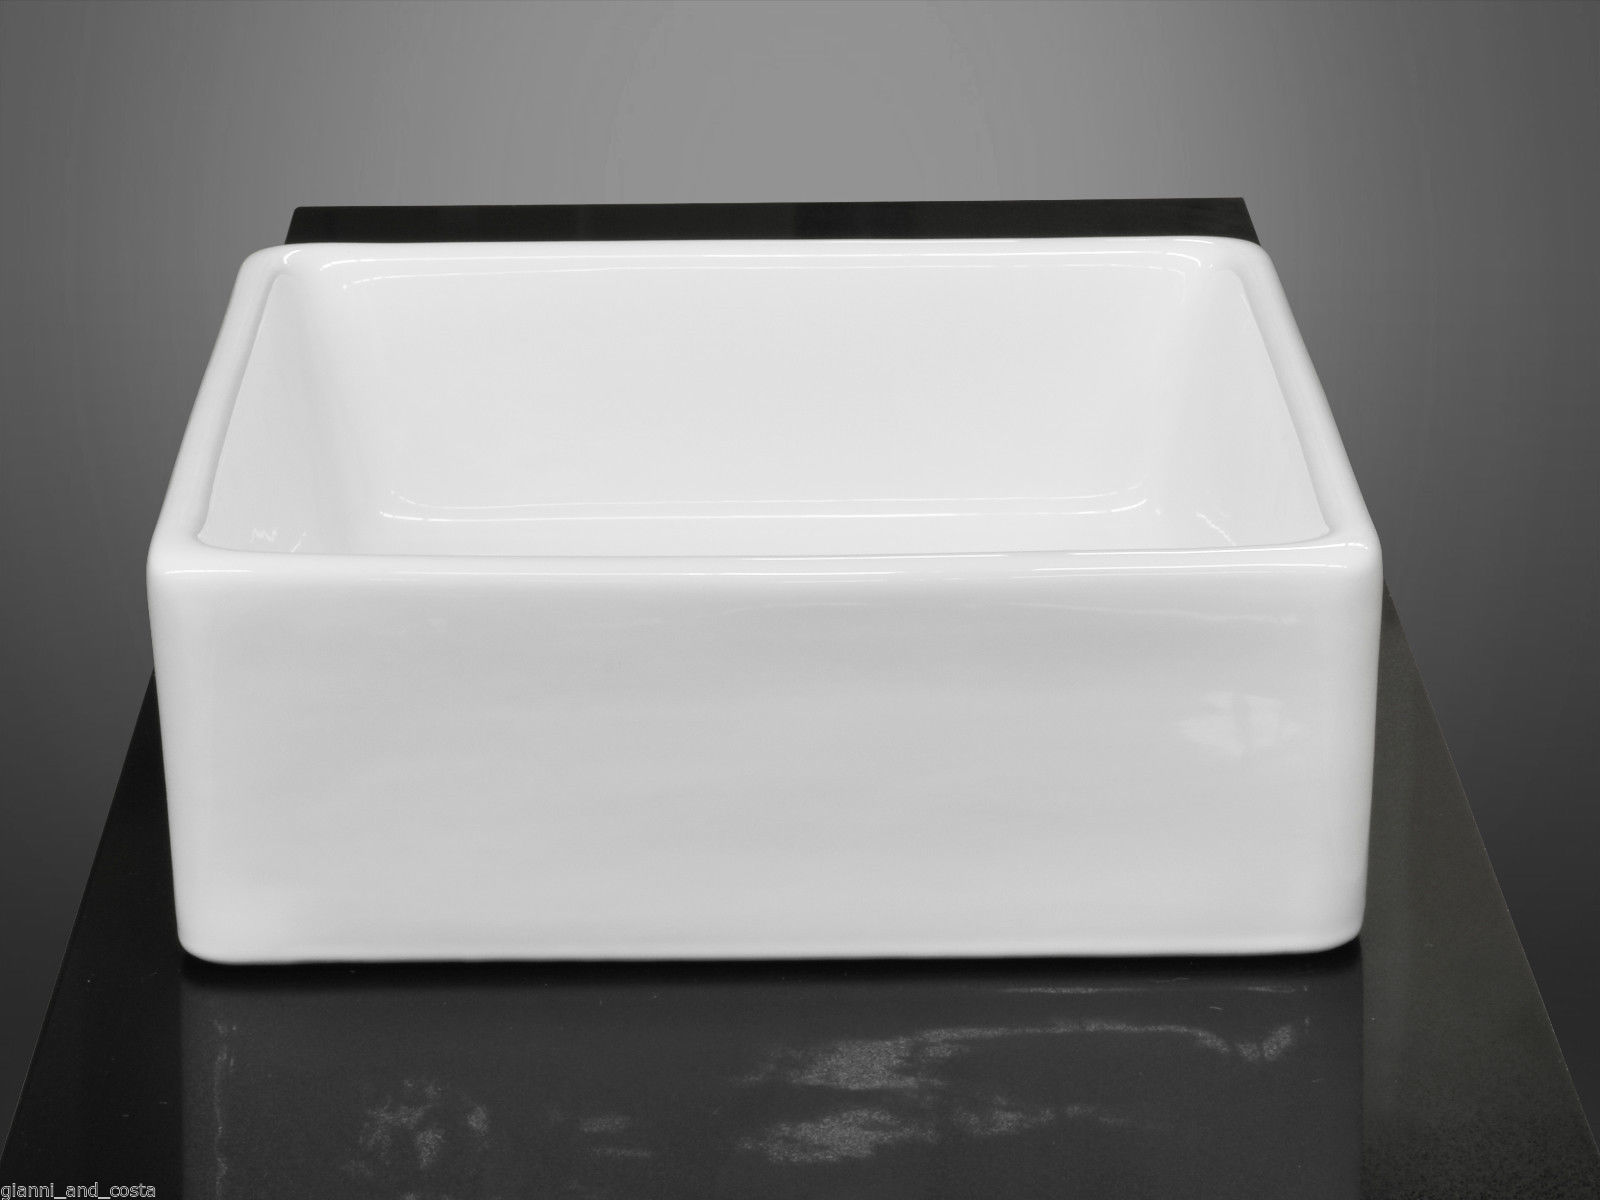  CERAMIC square ABOVE COUNTER TOP BASIN FOR VANITY INCLUDES POP UP WASTE